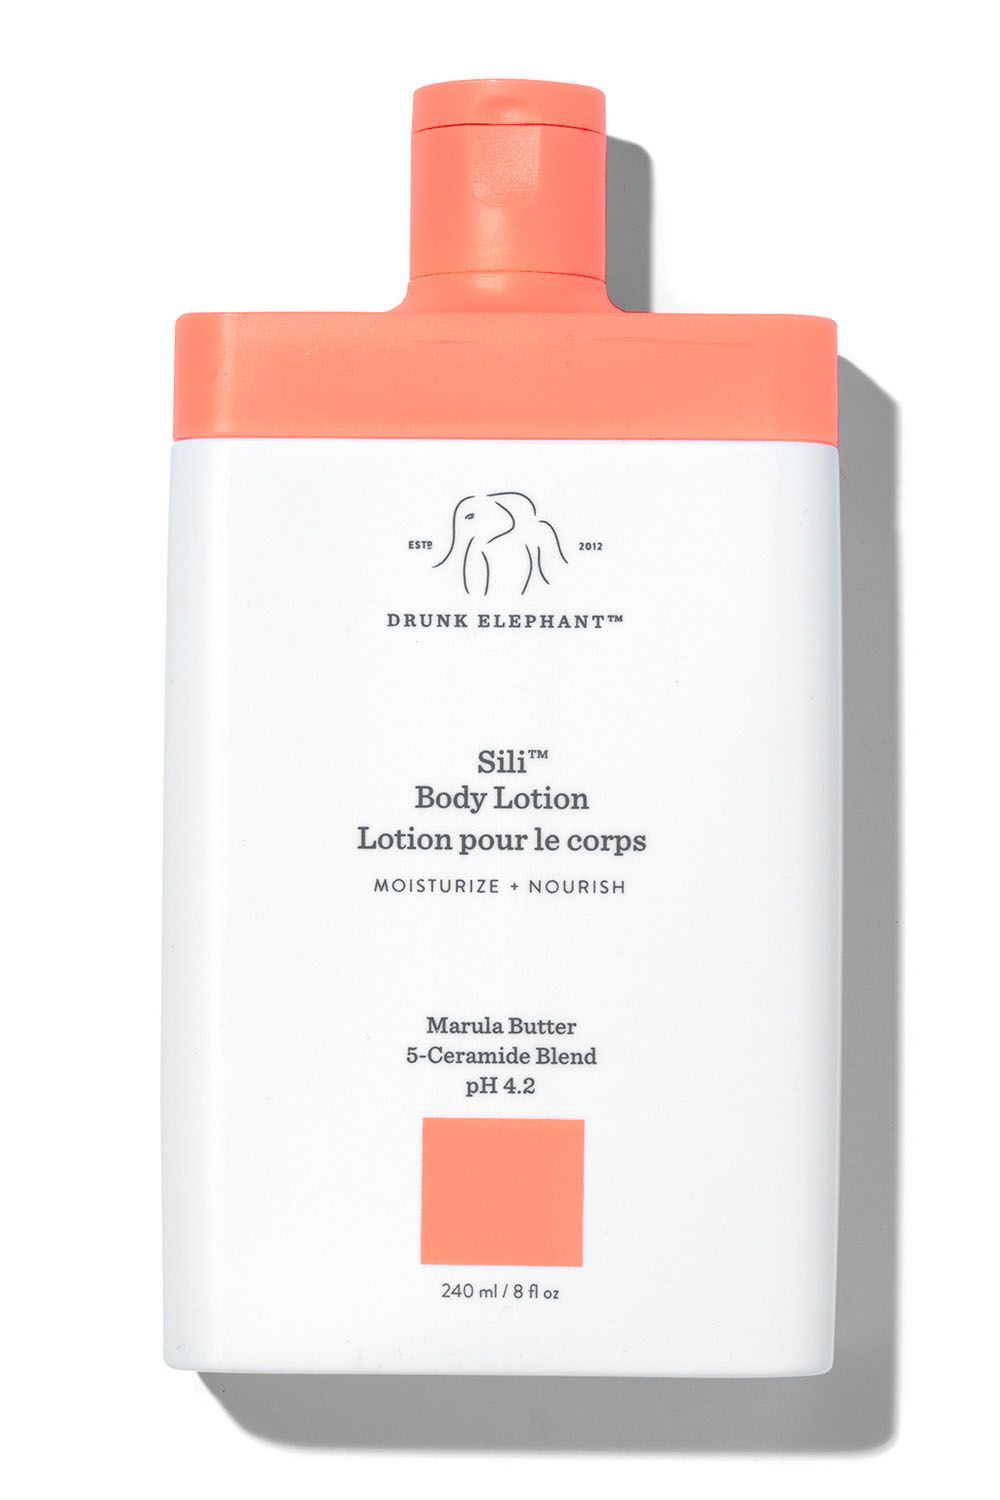 great body lotion